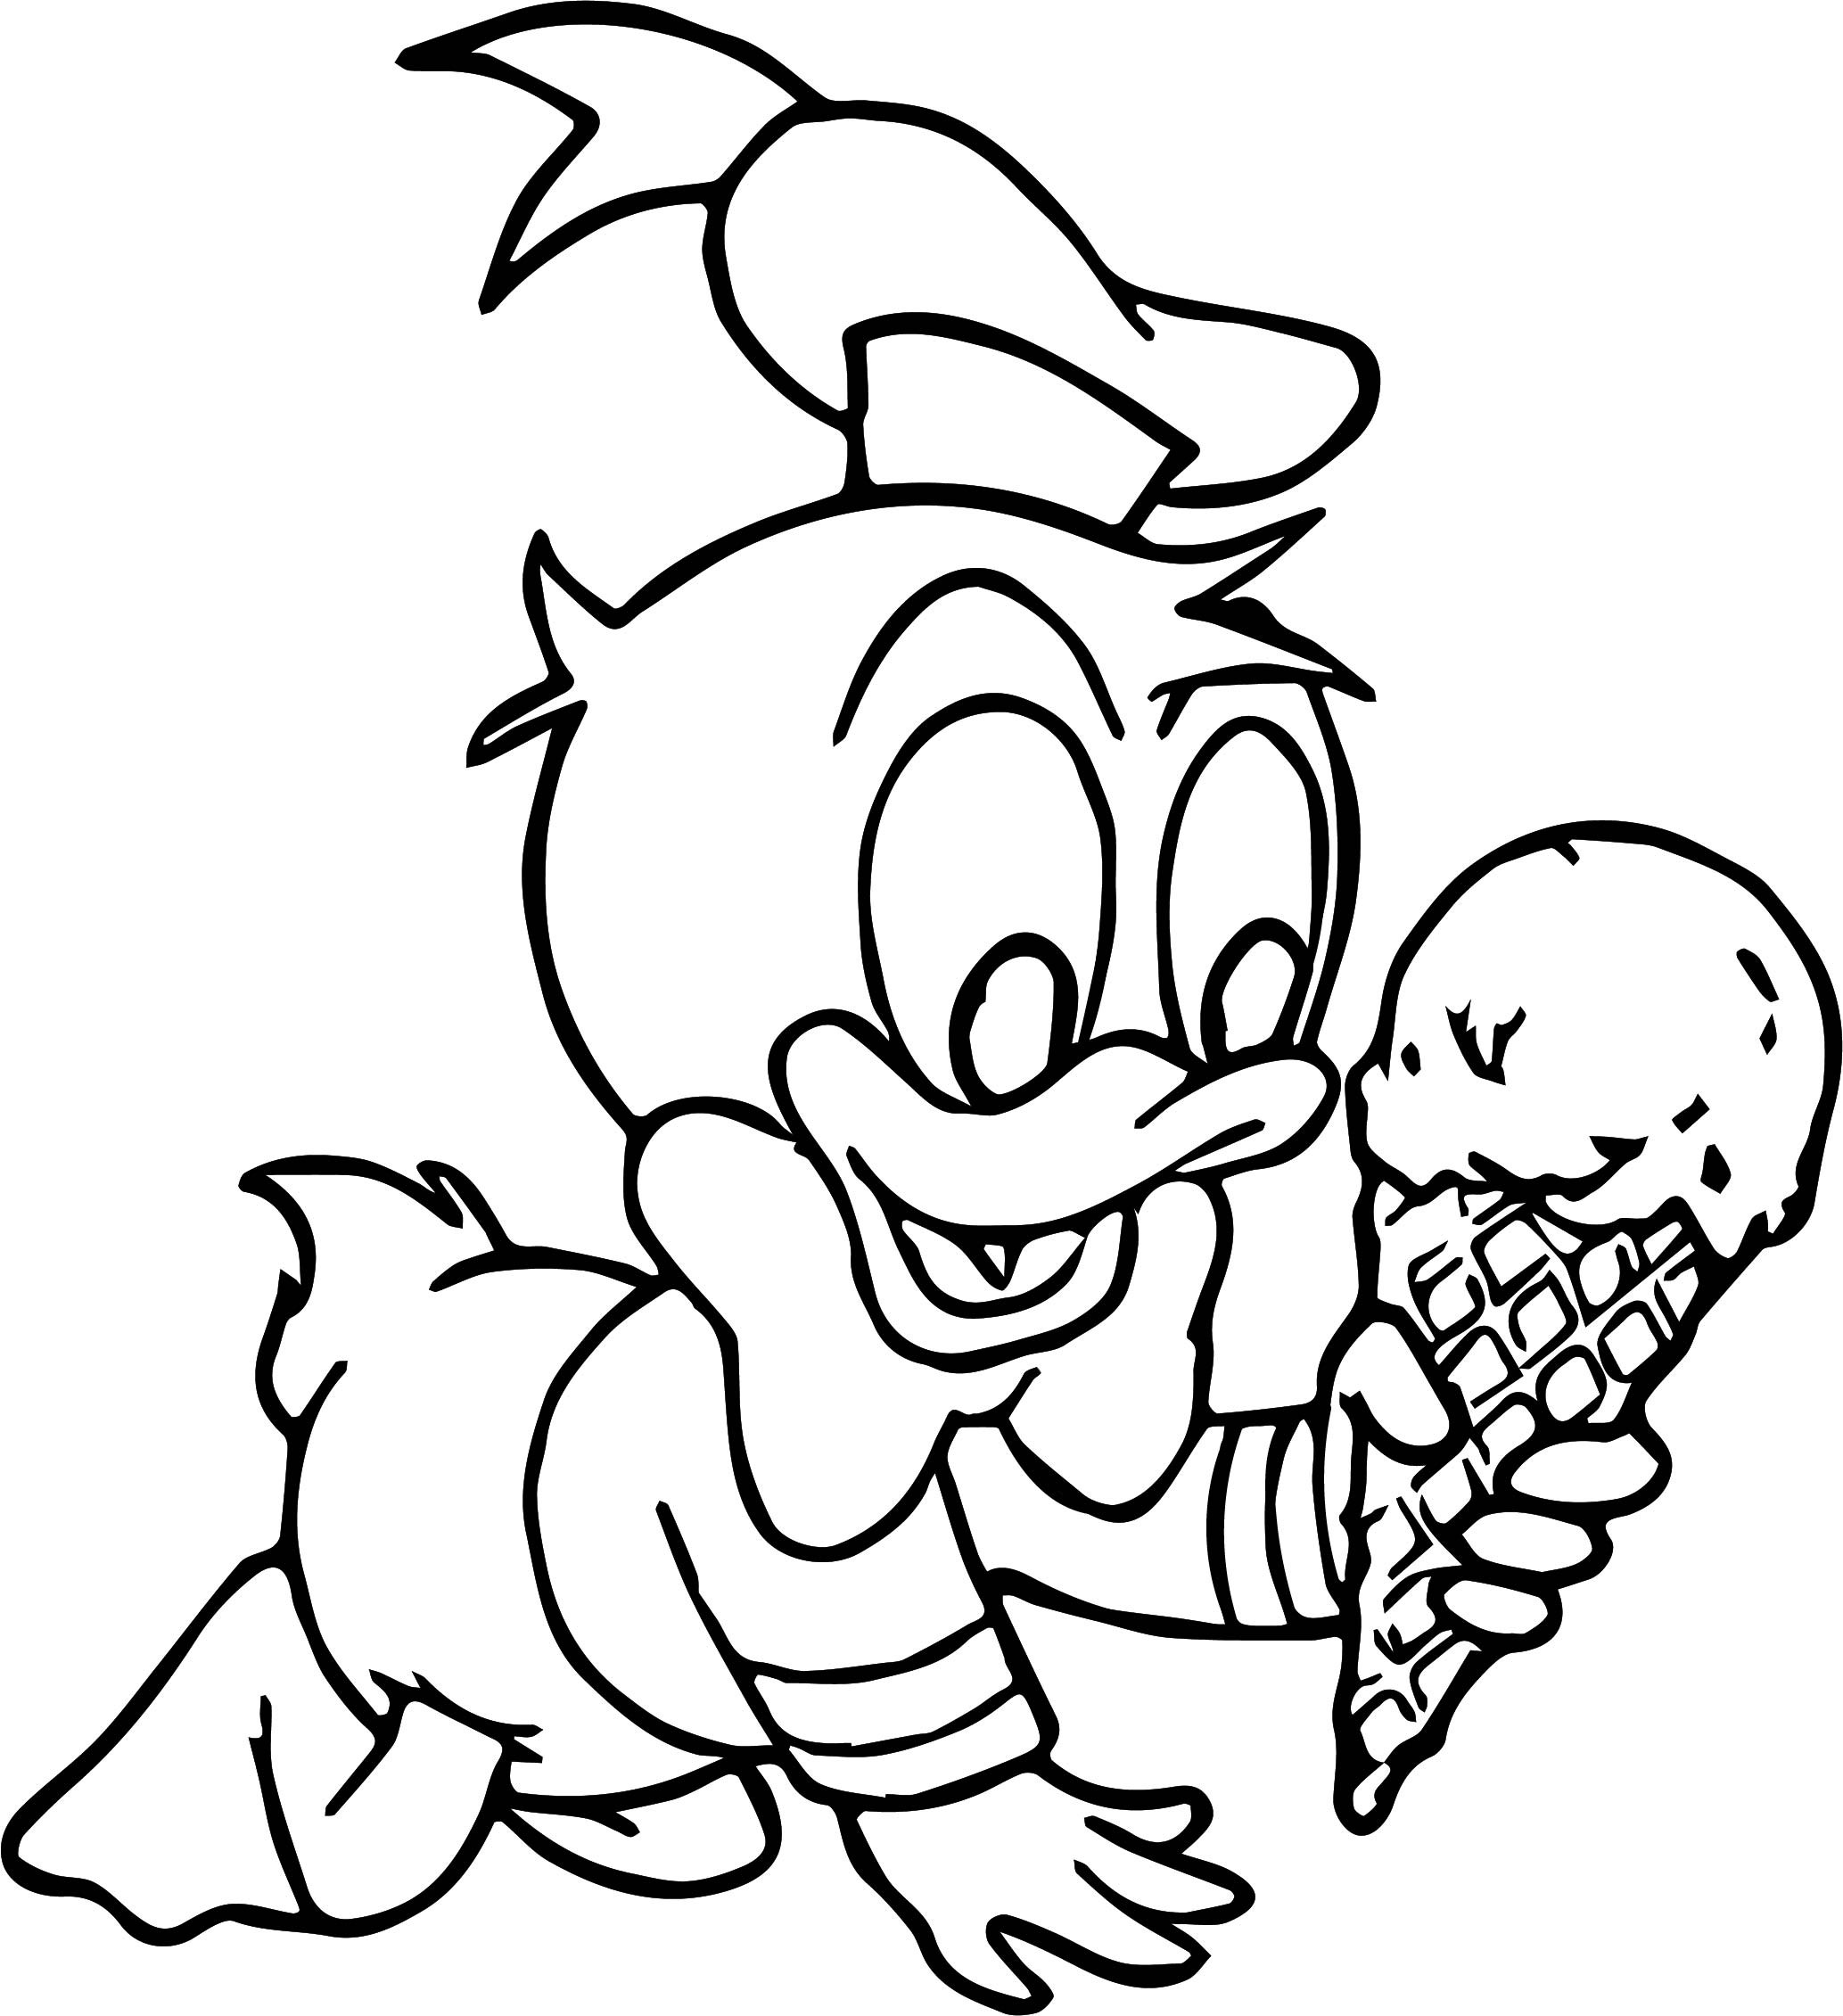 Baby Donald Duck Coloring Pages
 Baby Donald Duck Ice Cream Coloring Page